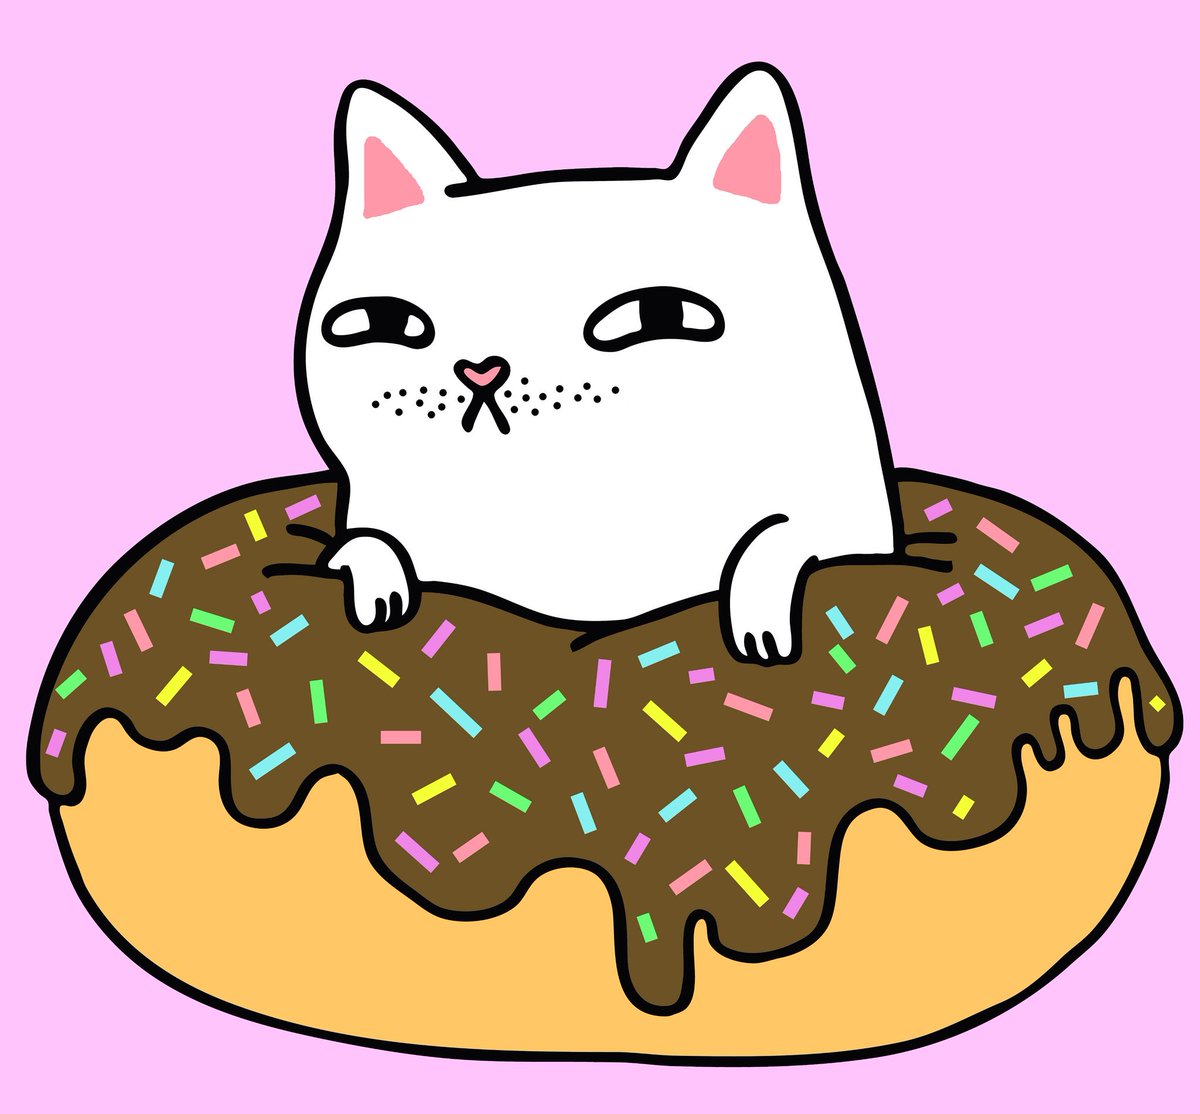 Natelle Draws Stuff on Twitter: "Cats and donuts on my @TeePublic ...